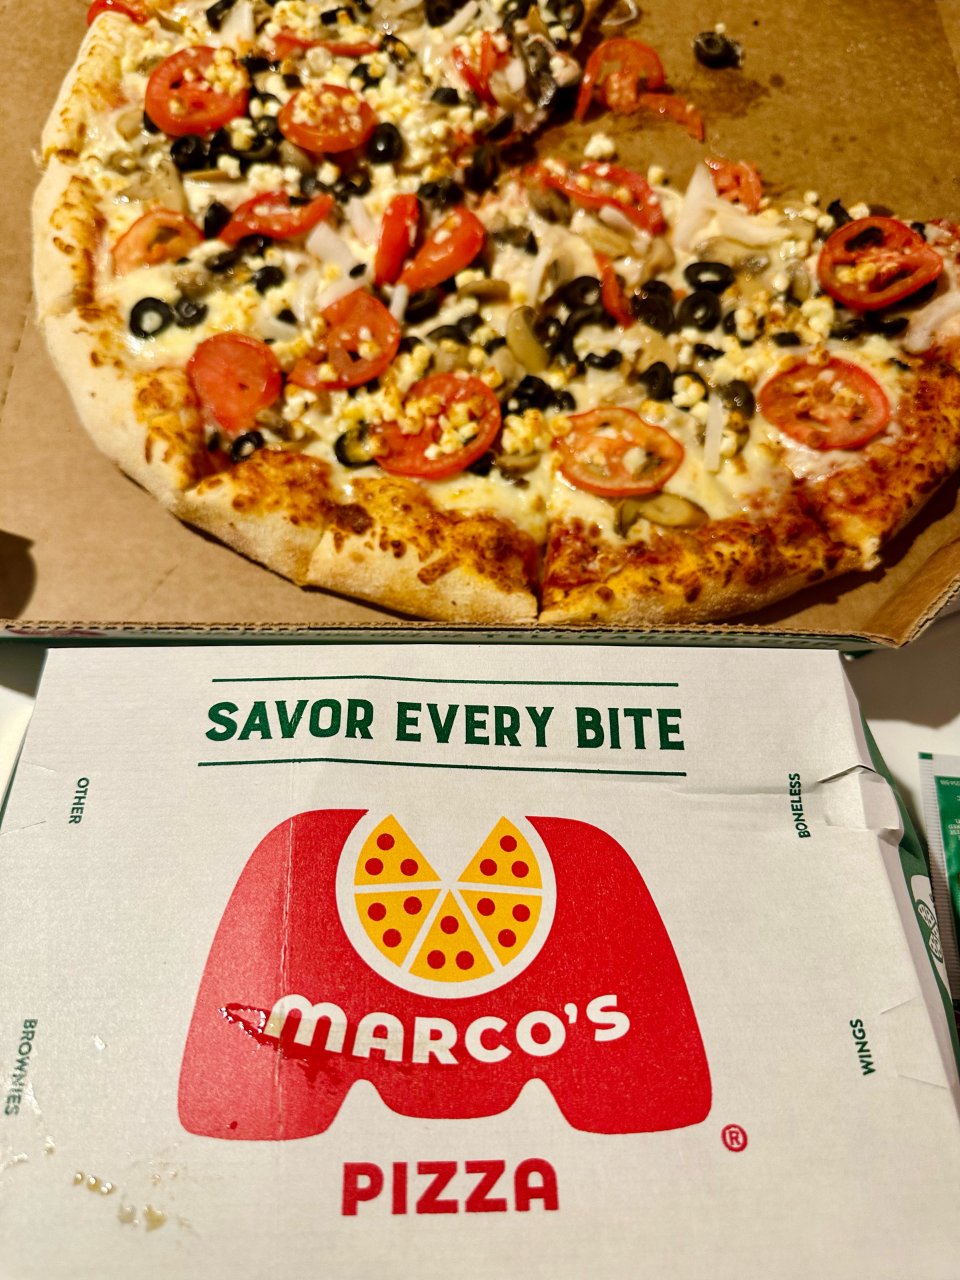 Marco's pizza